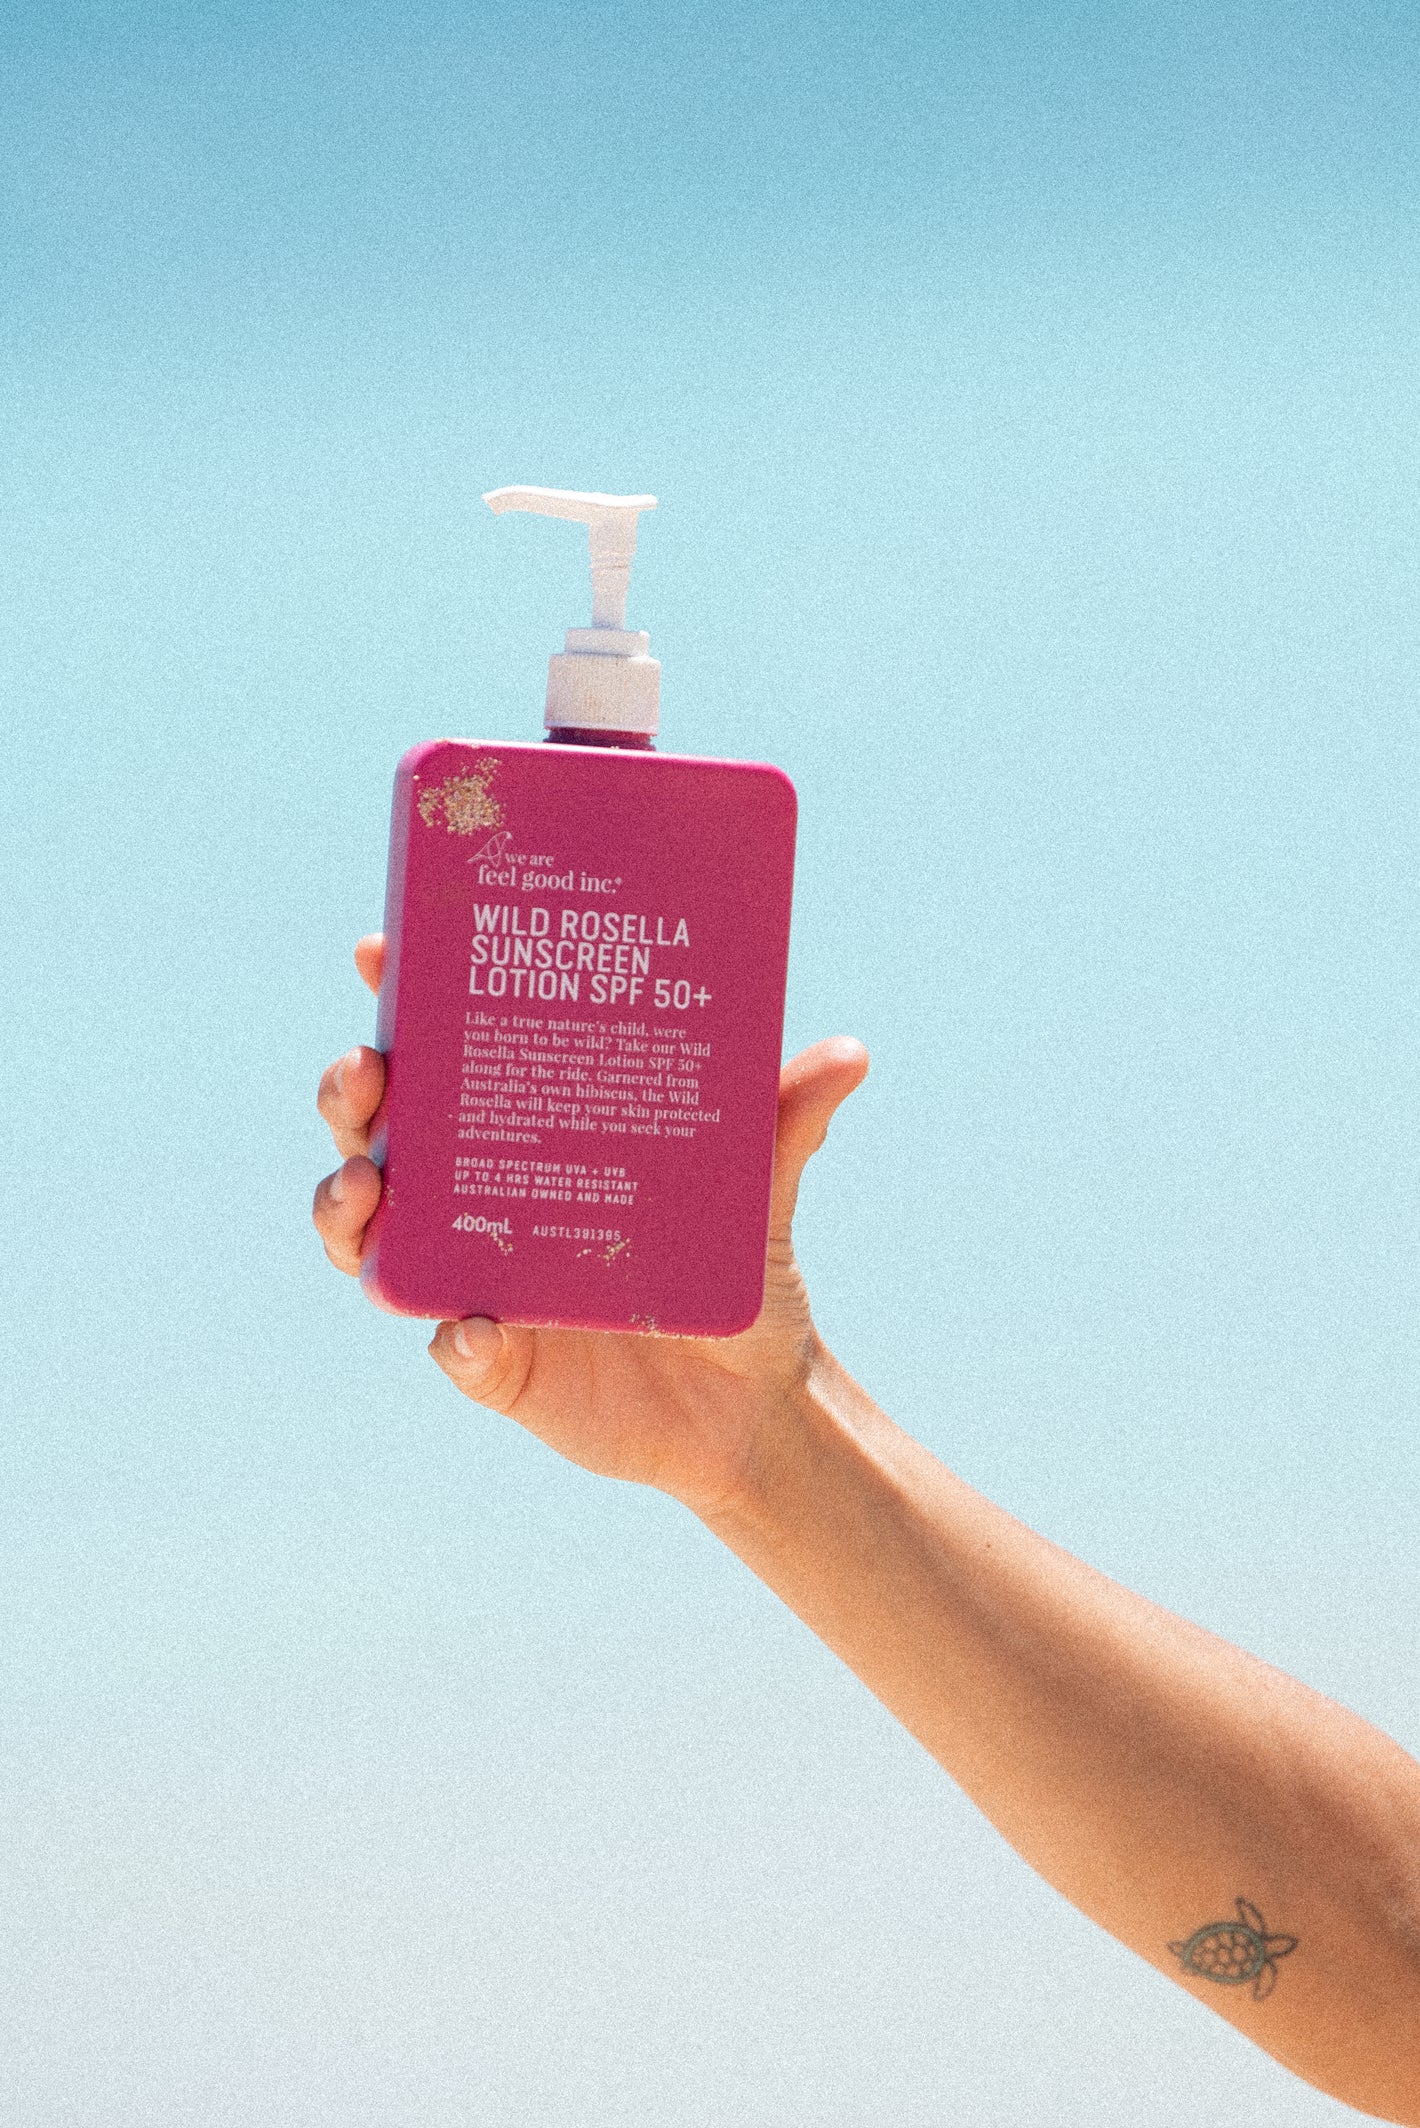 A plastic bottle of We Are Feel Good Inc. Wild Rosella Sunscreen Lotion SPF 50+ held up against a clear blue sky